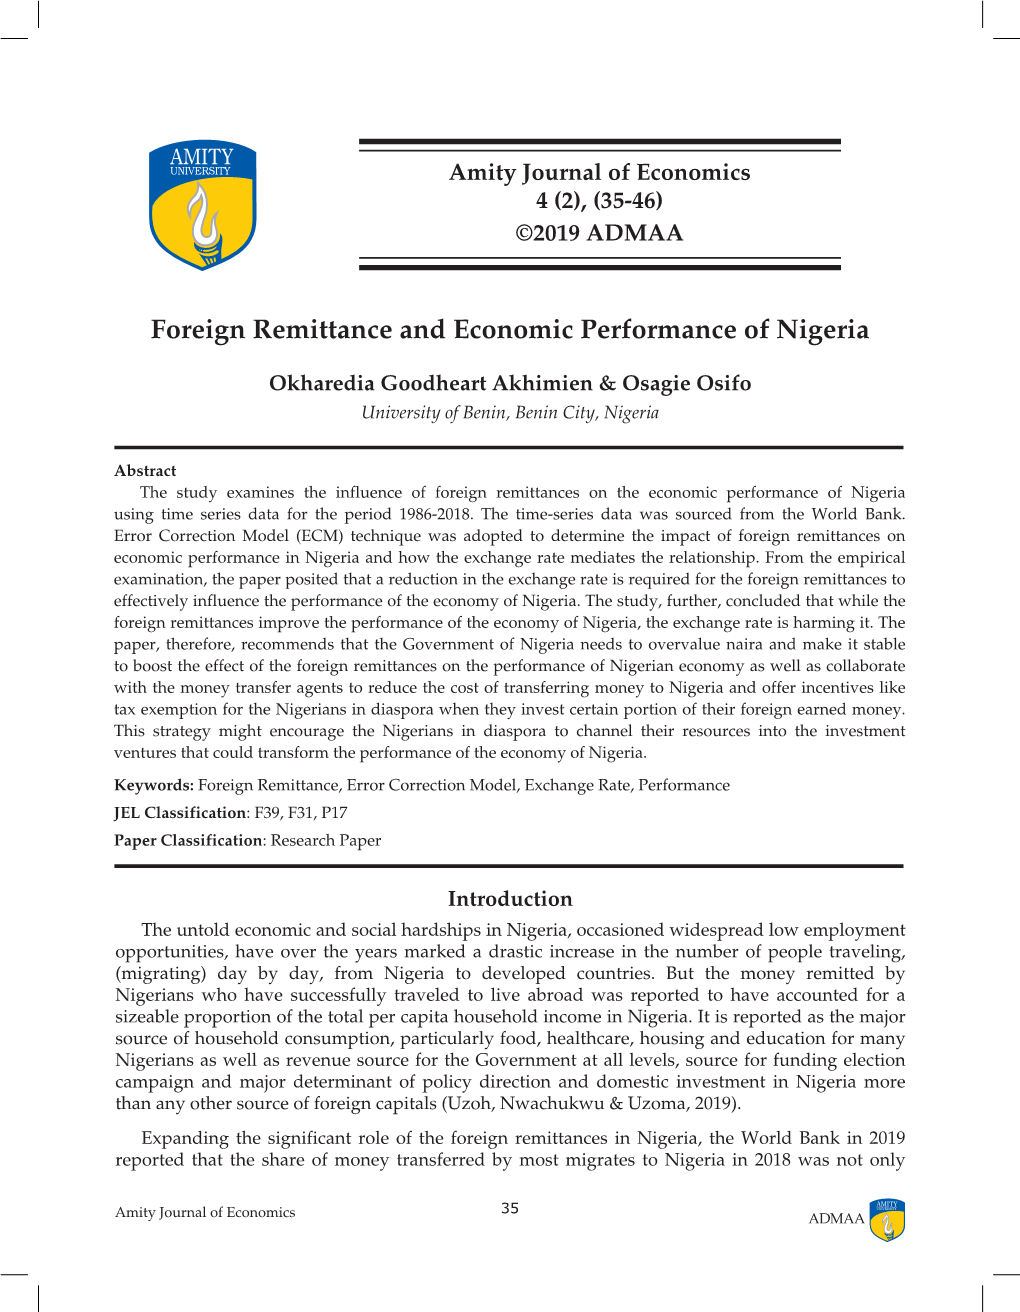 Foreign Remittance and Economic Performance of Nigeria